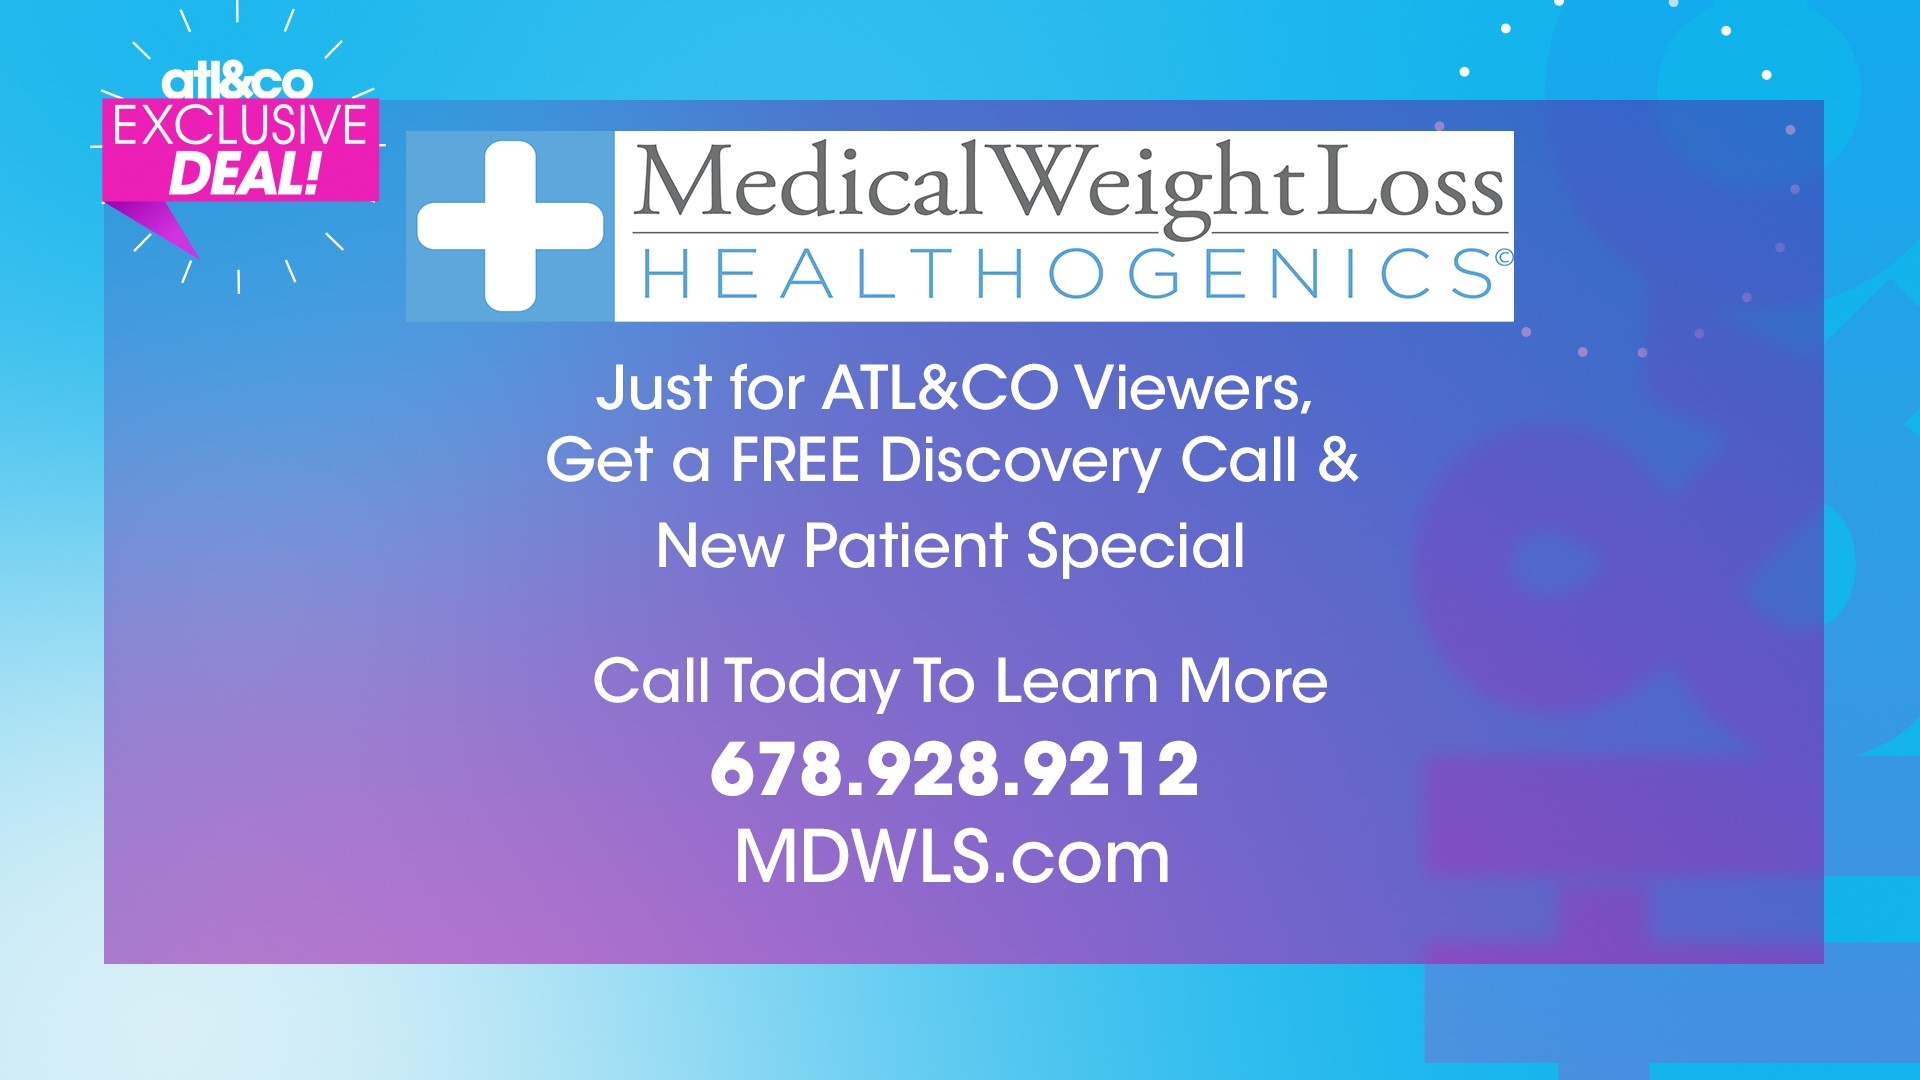 Right now, ATL&CO viewers get a FREE Discovery Call and a new patient special! Call 678.928.9212 or visit MDWLS.com | Paid Content